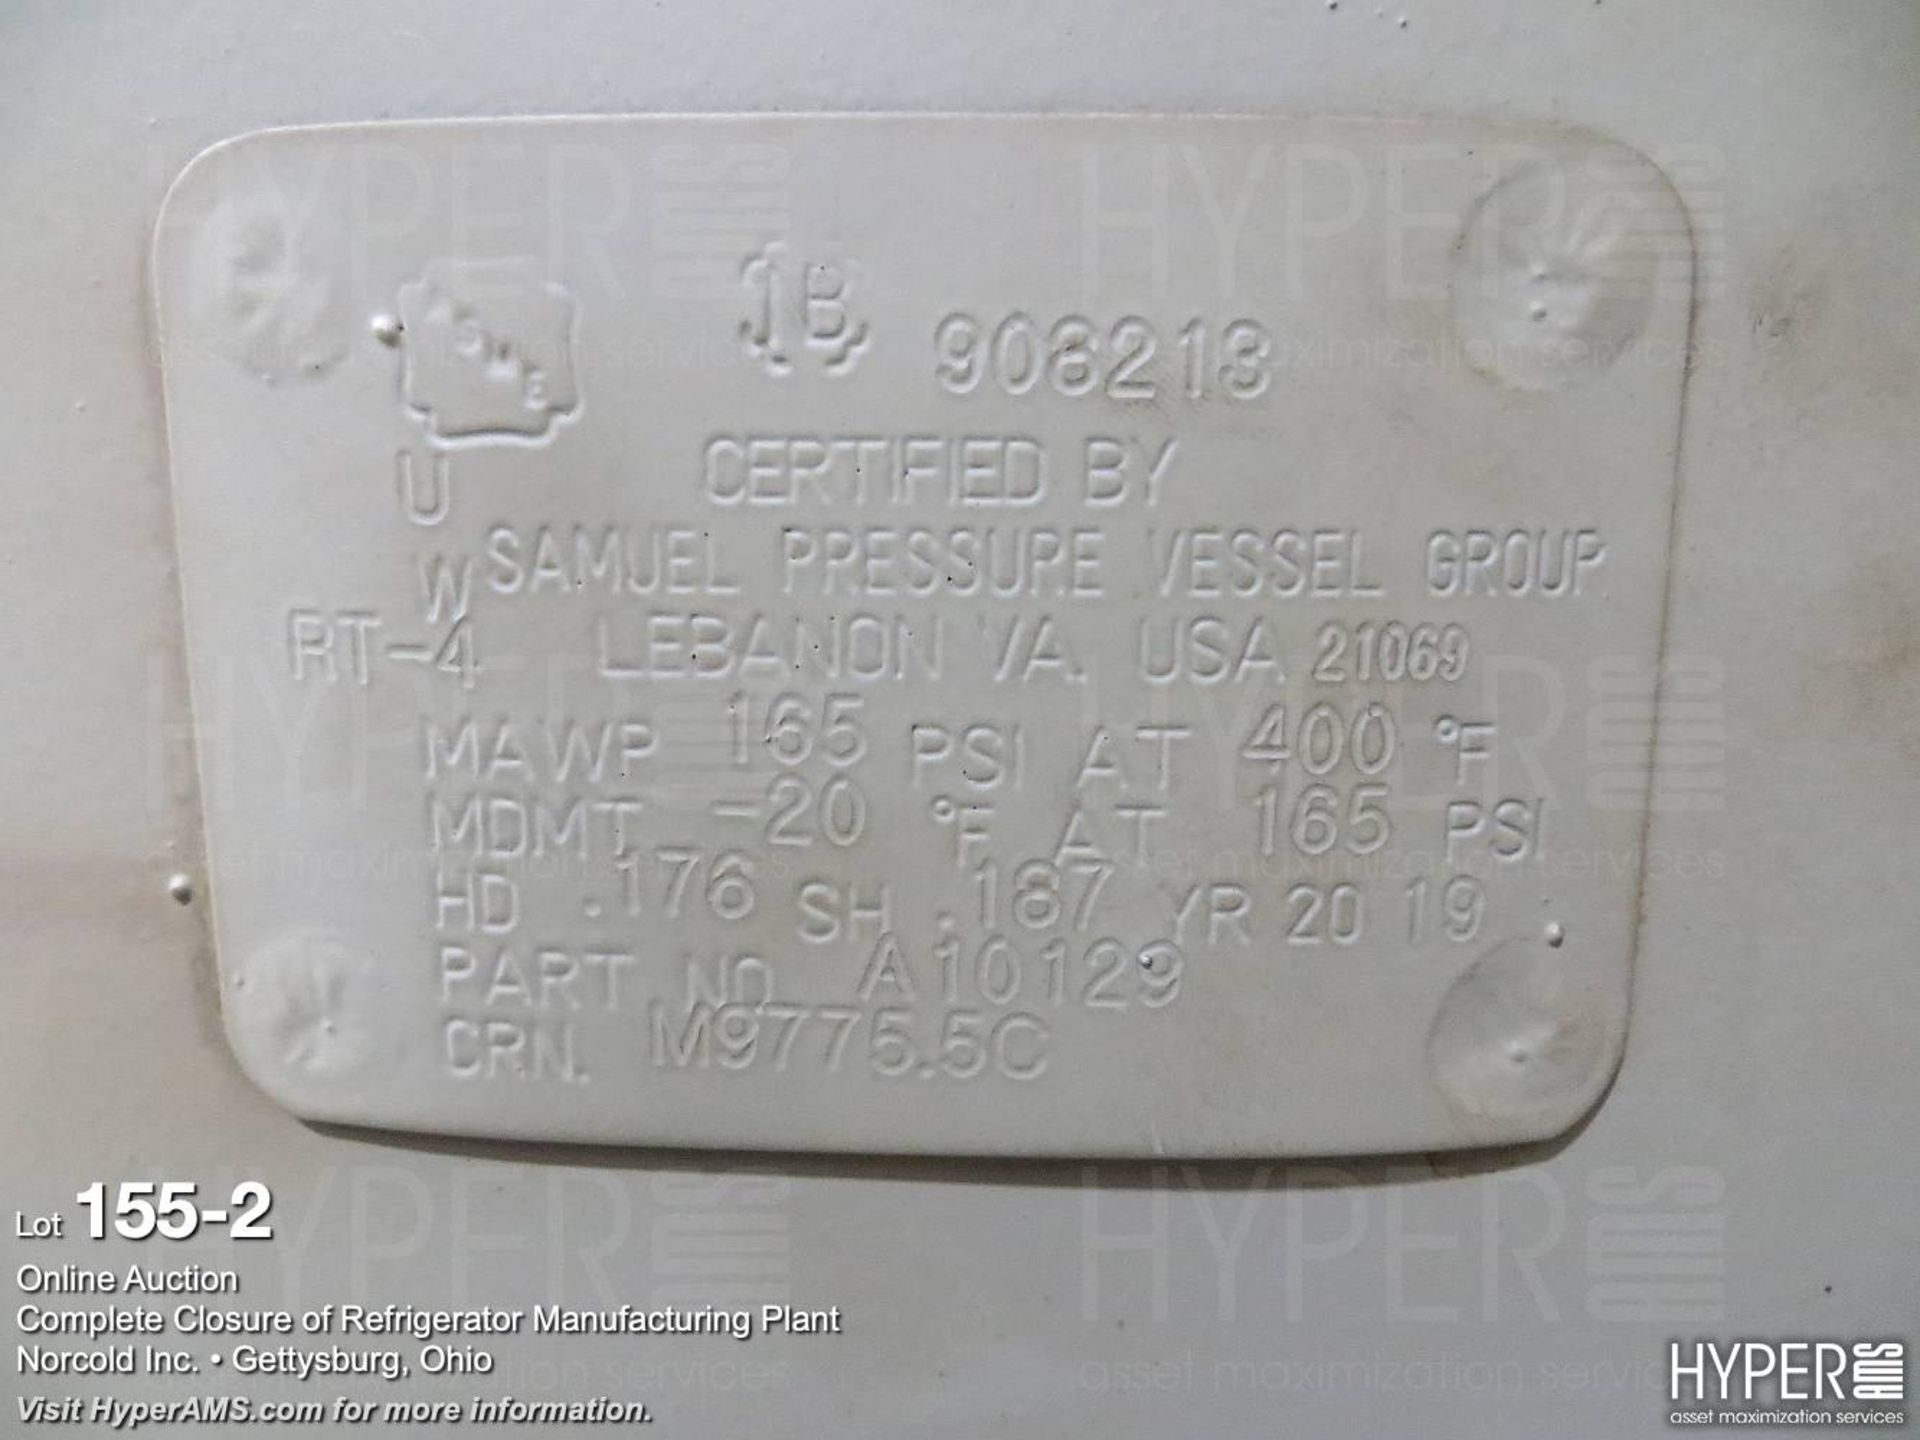 Air receiver tank approx. 36" diam. X 105" - Image 3 of 3